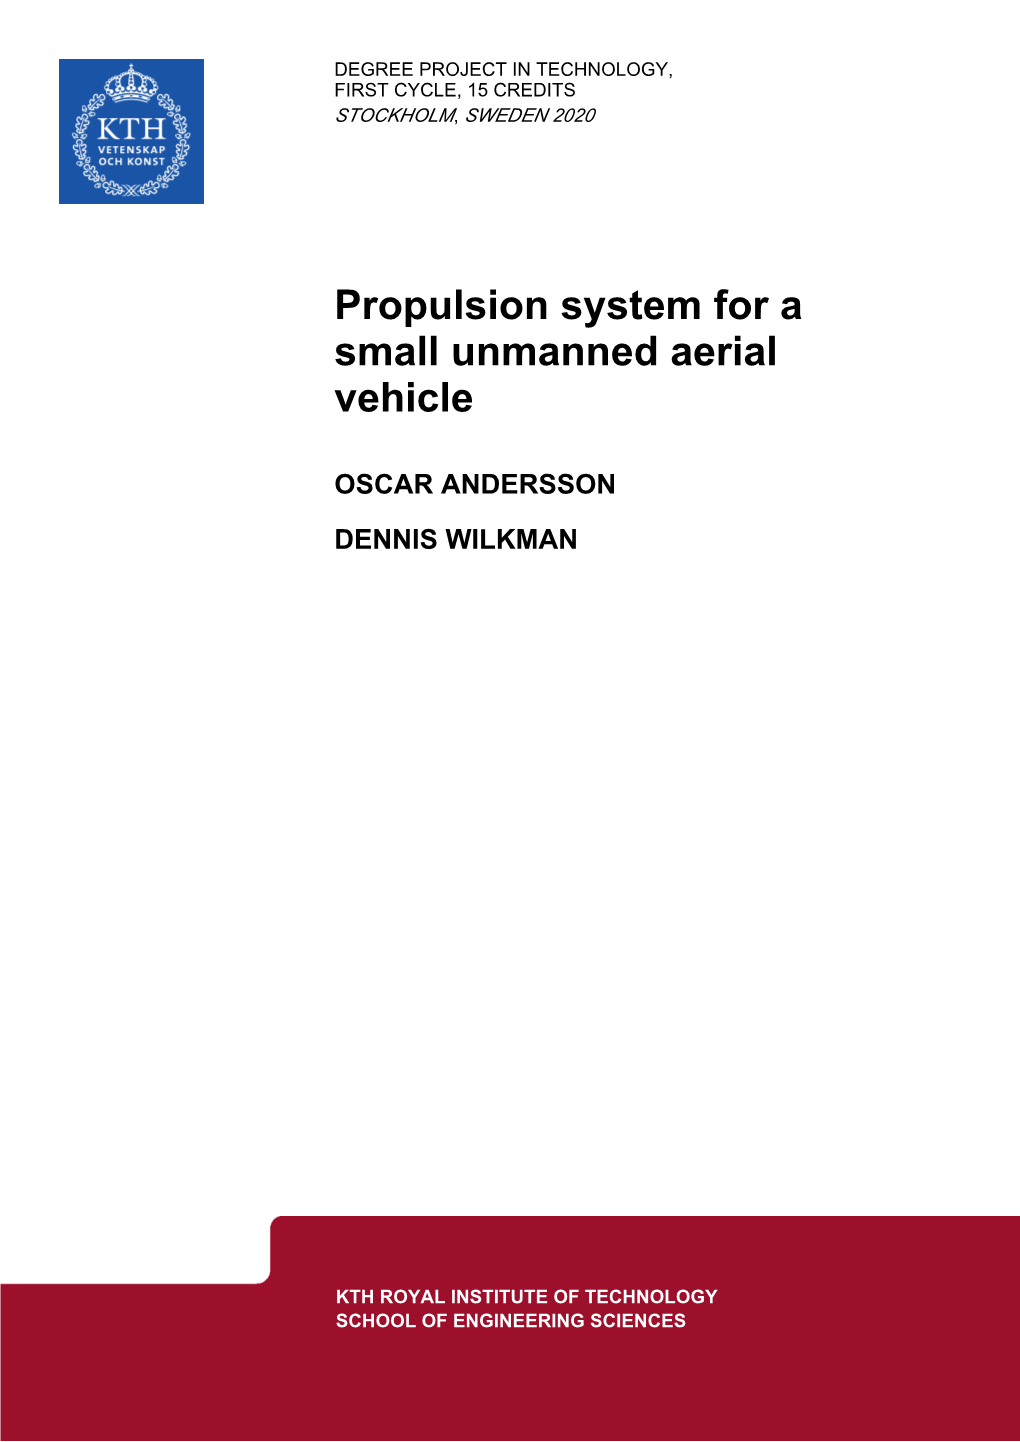 Propulsion System for a Small Unmanned Aerial Vehicle